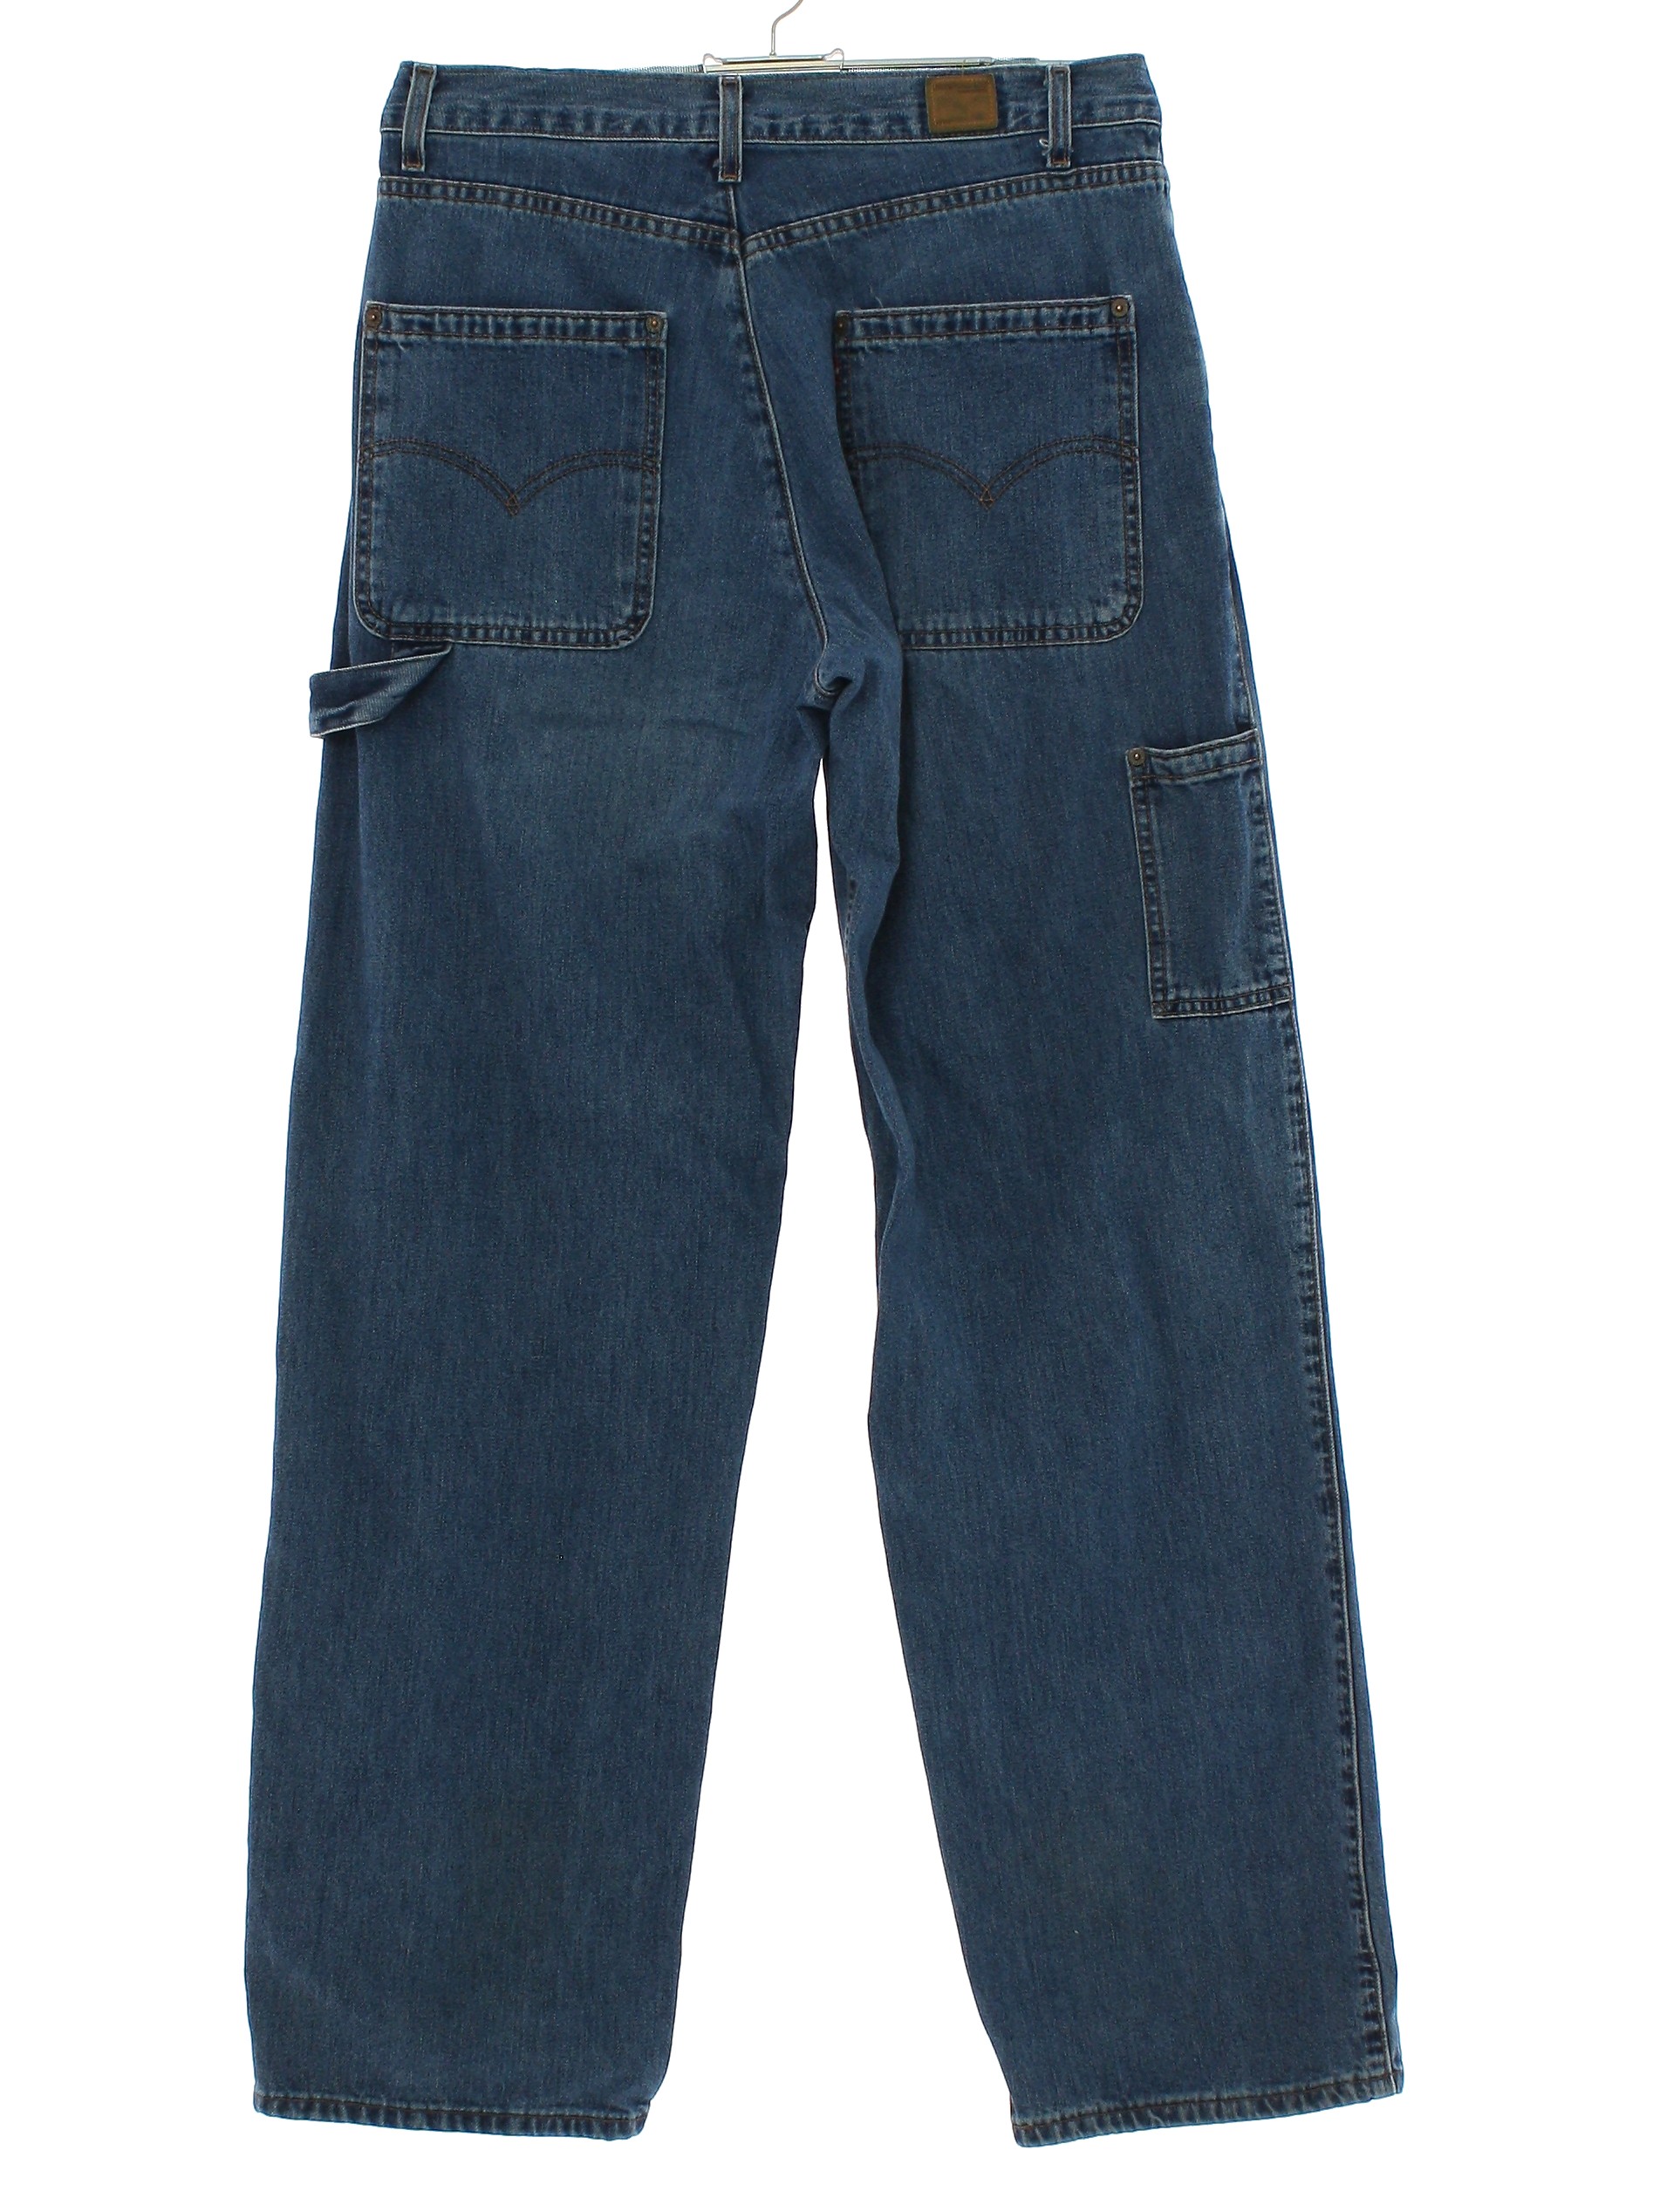 Pants: 90s (2000) -Levis 603, Made in USA- Mens dark blue background ...